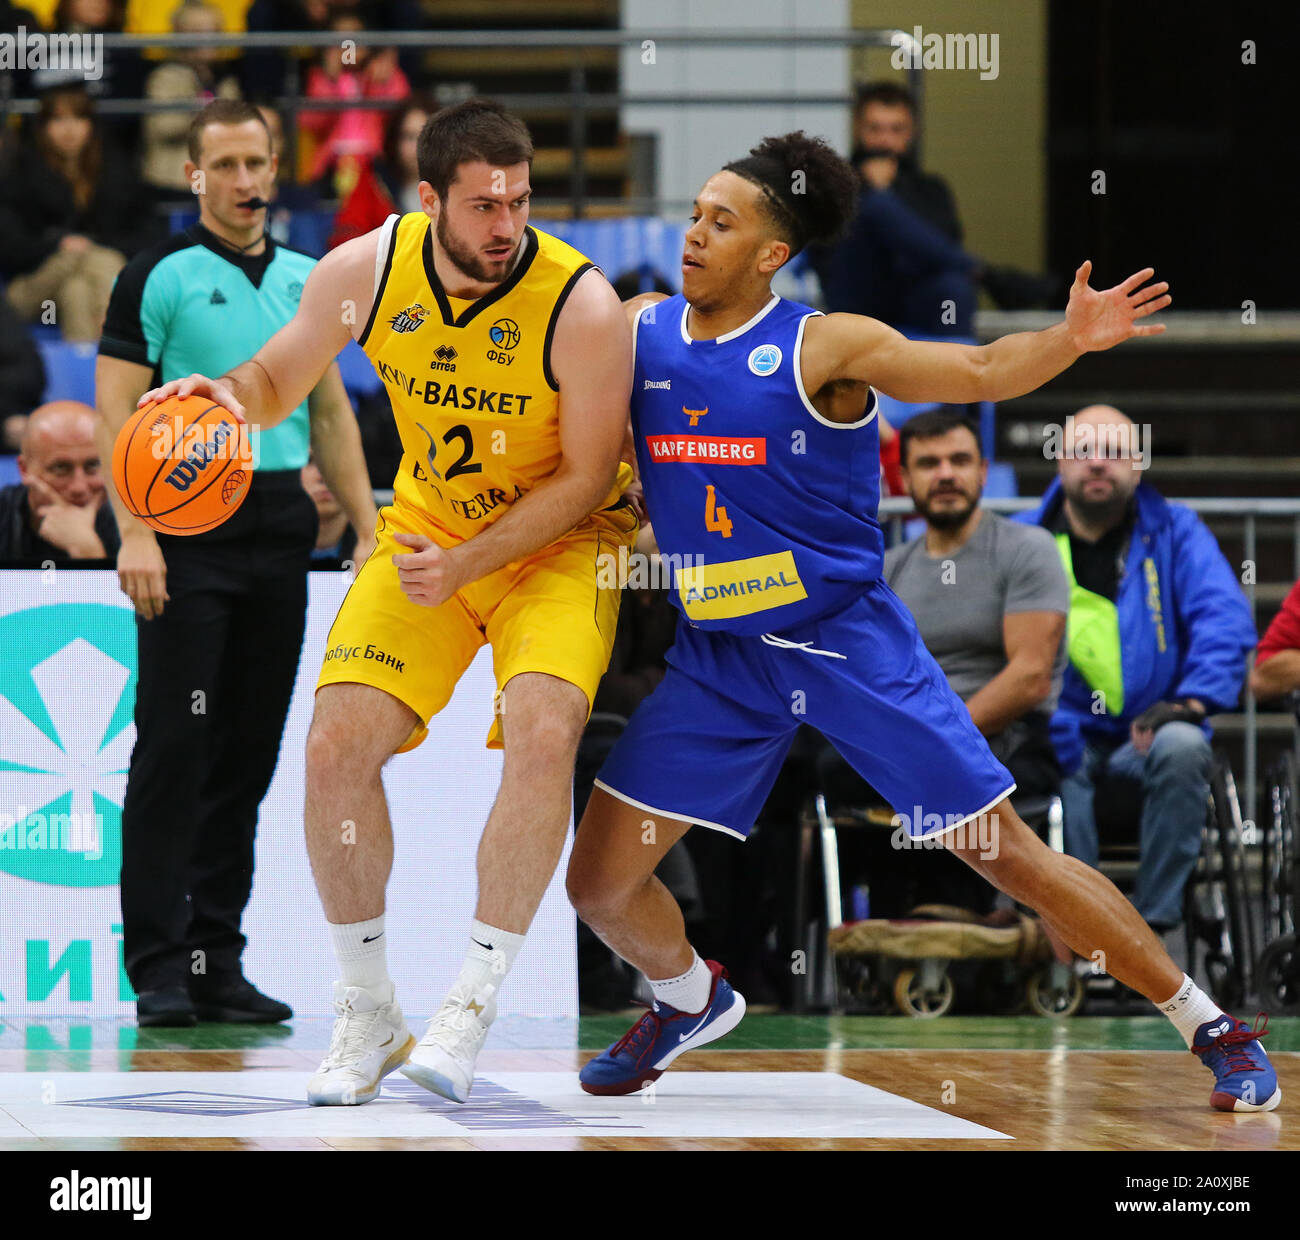 KYIV, UKRAINE - SEPTEMBER 20, 2019: Viacheslav Petrov of BC Kyiv Basket (L) and Keenan Nathanial Gumbs of Kapfenberg Bulls in action during their FIBA Basketball Champions League Qualifiers game Stock Photo